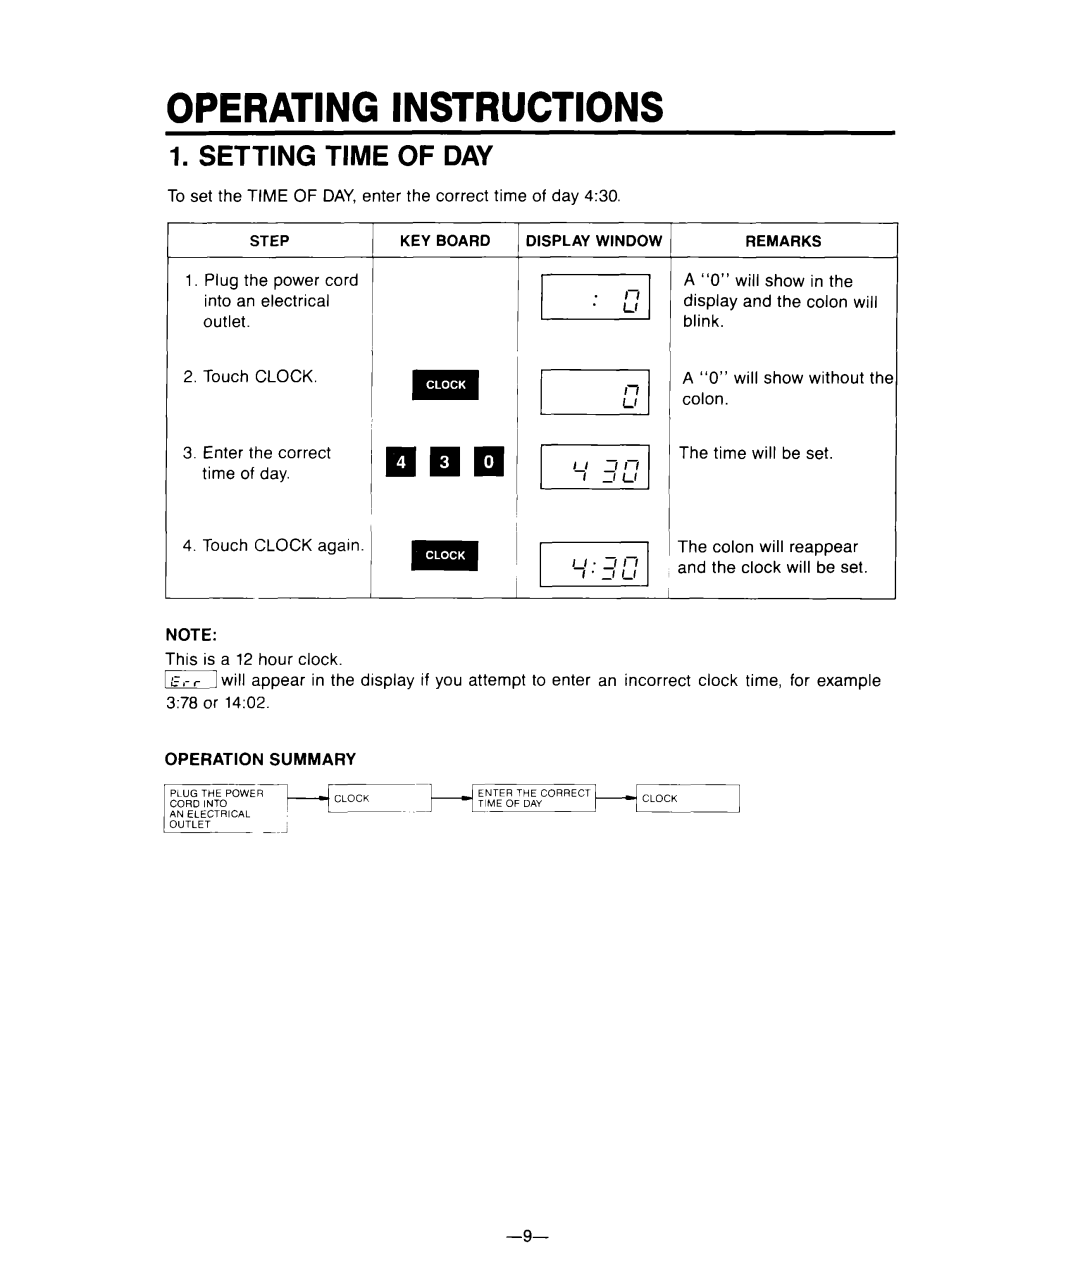 Whirlpool MFE14XW warranty Operating Instructions, Setting Time Of Day 